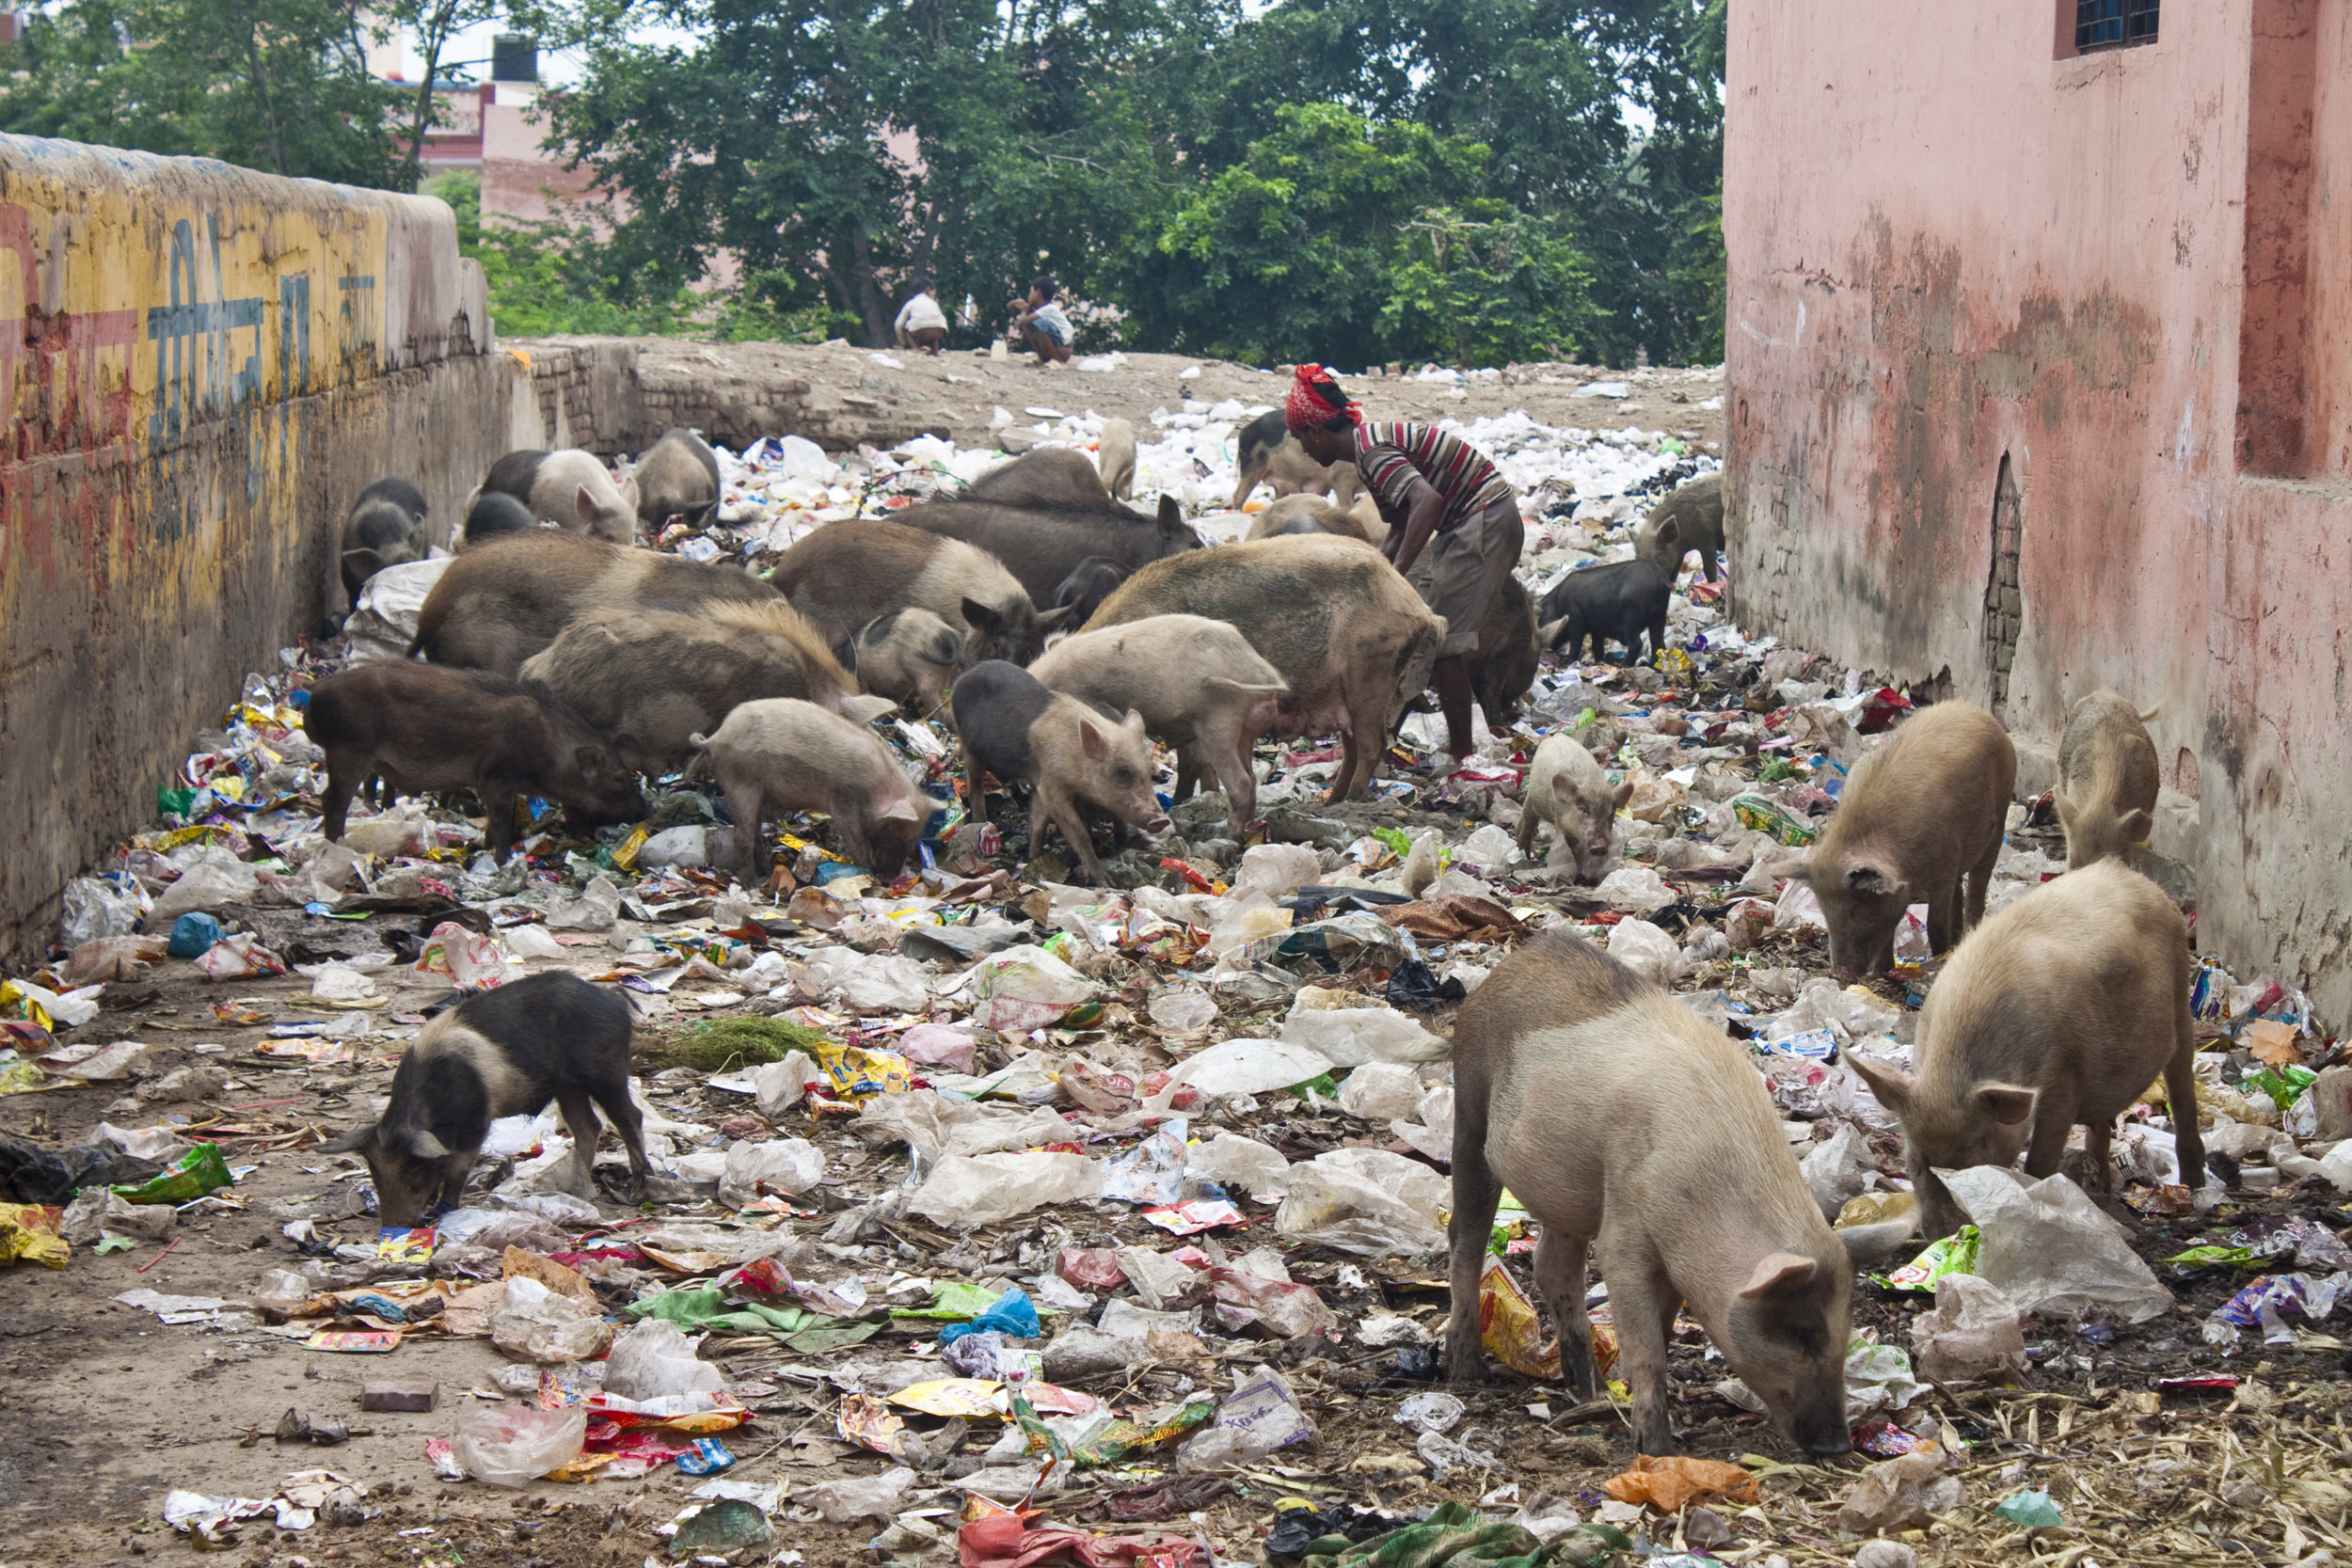 Most pig farmers in India belong to lower socio-economic strata and, due to the lack of regulations, disease occurrences can cause heavy economic losses in terms of production